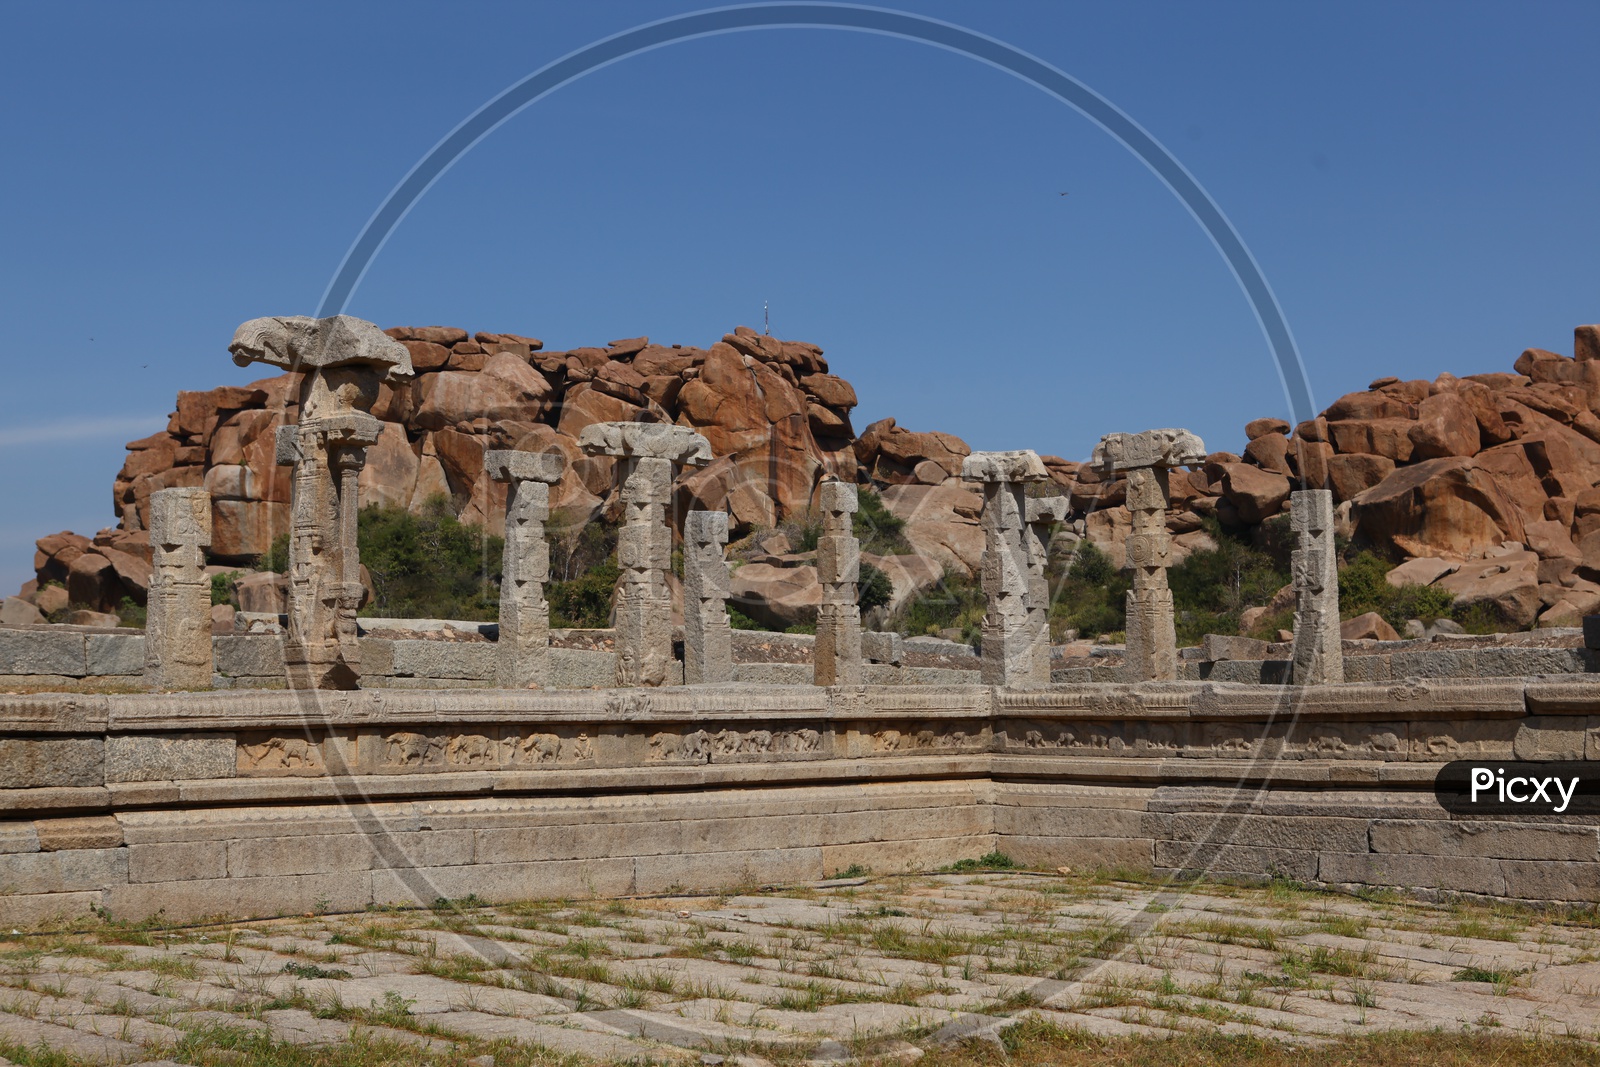 Granite rocks supported by the columnar pillars alongside the temple ruins